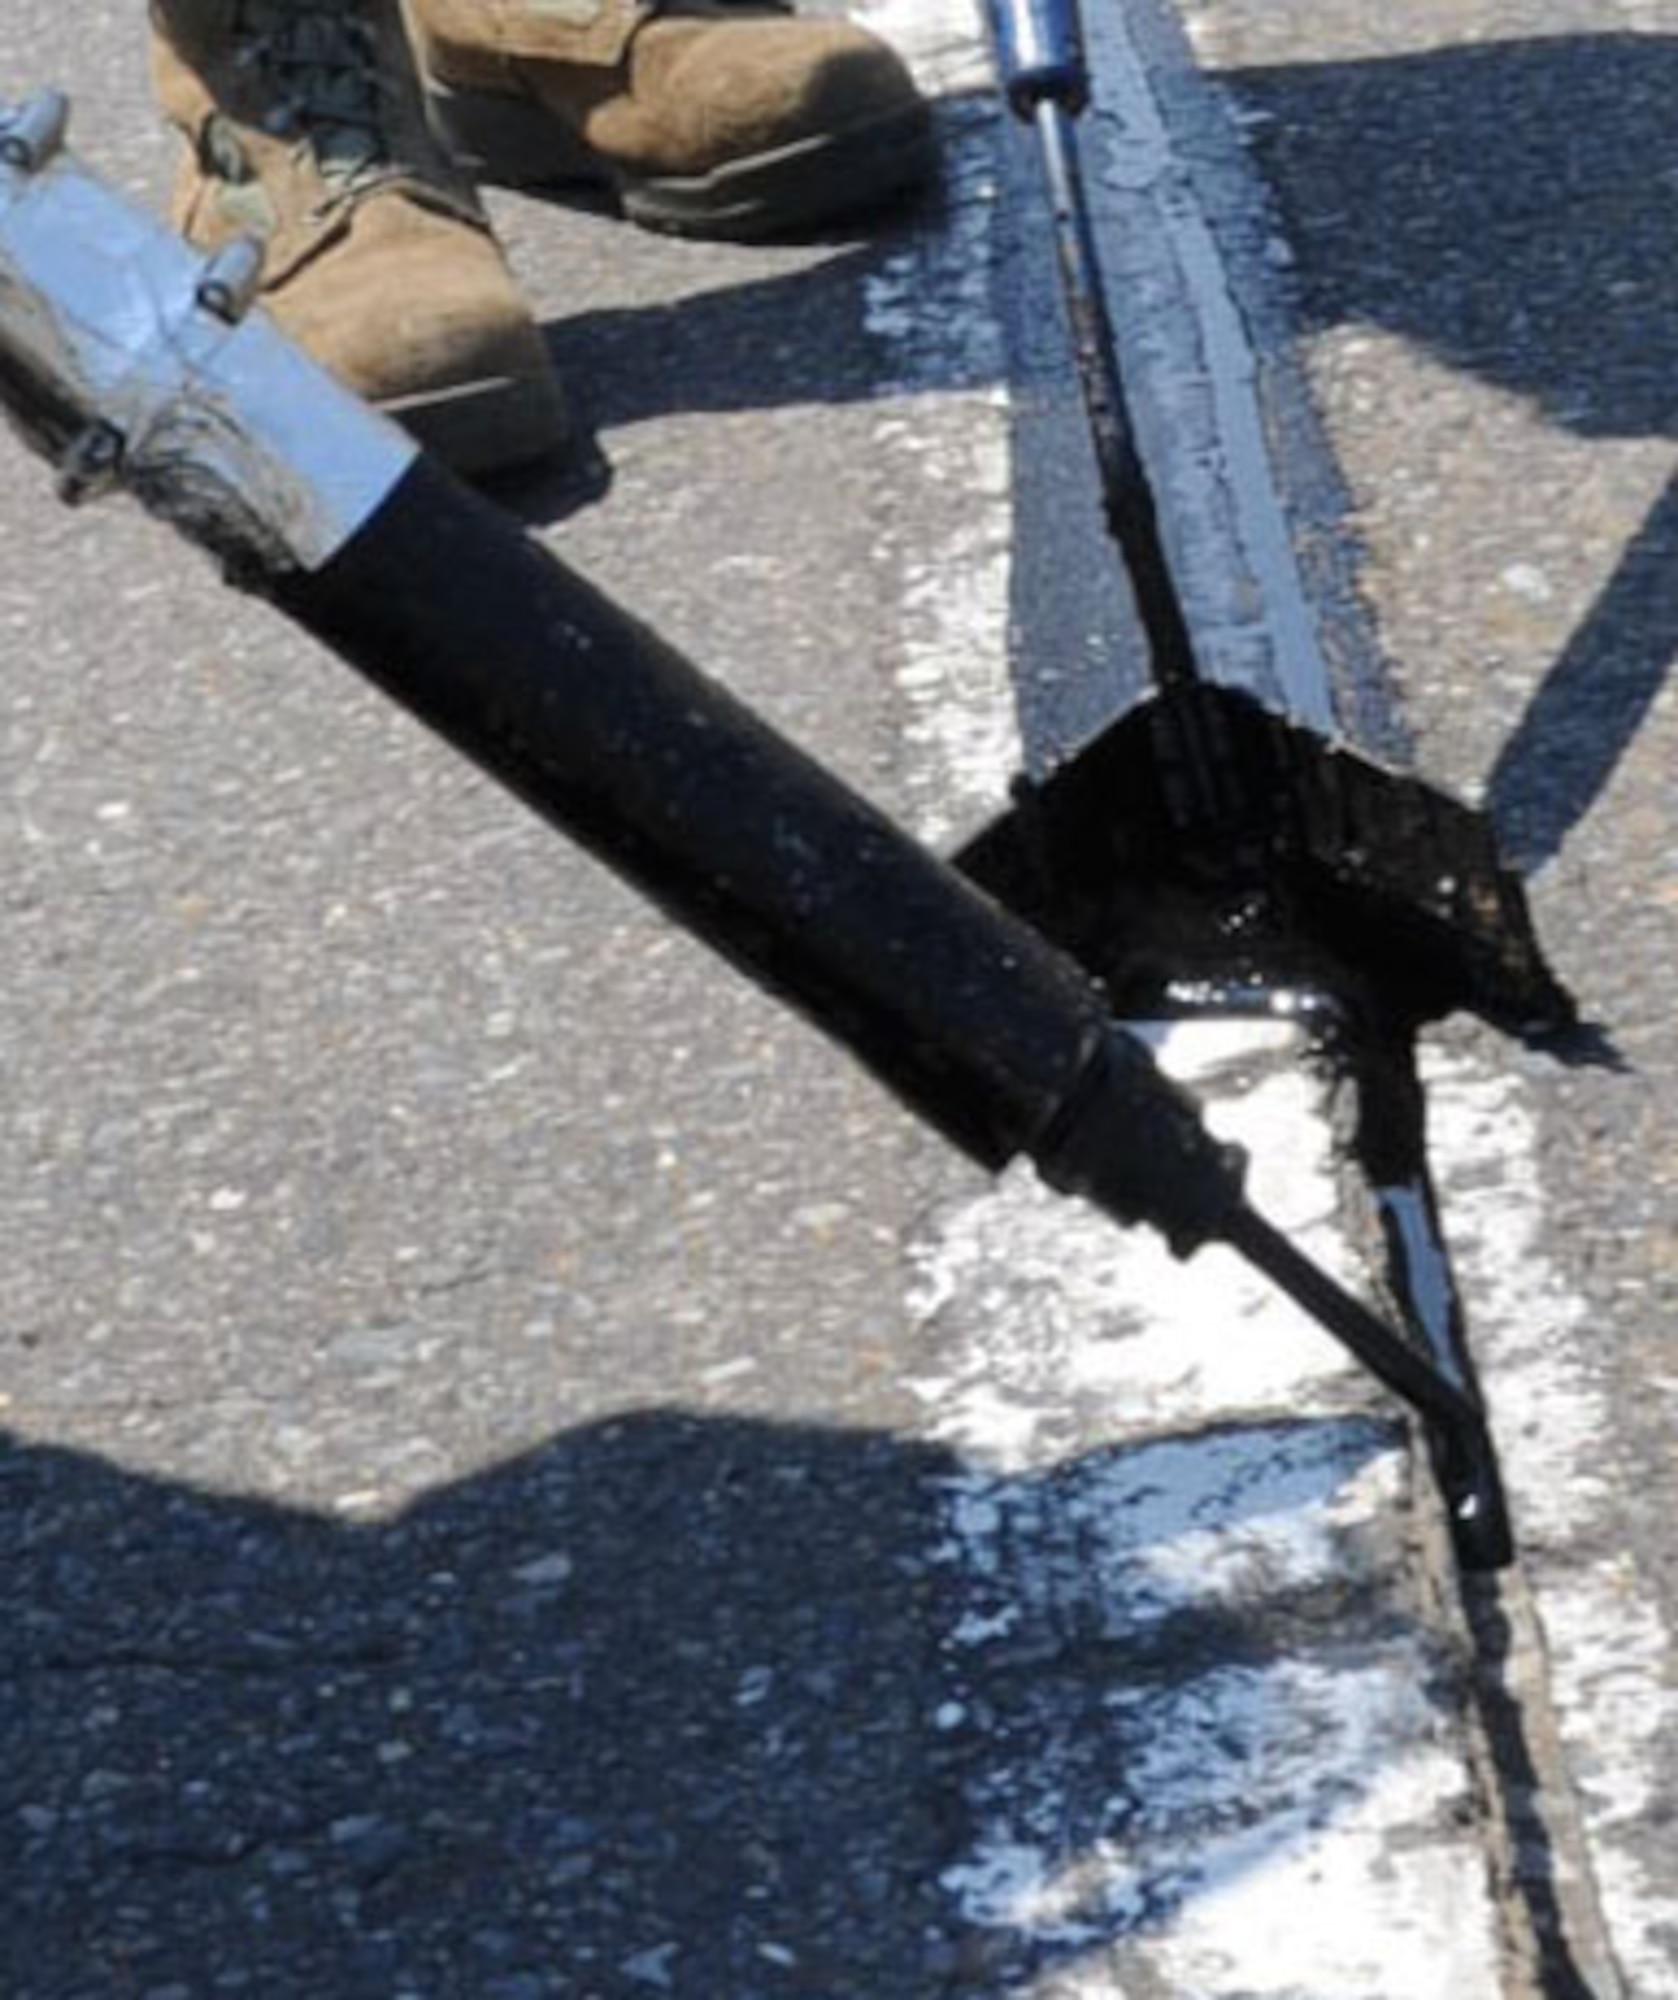 Members of the 35th Civil Engineer Squadron pavement and construction shop fill cracks in the road on Freedom Drive with hot asphalt at Misawa Air Base, Japan, June 27, 2012. This project is done every summer throughout the base to expand the life cycle of the roads. The hot asphalt sealant can only be applied to roads when the outside temperature is 65 degrees Fahrenheit or higher. (U.S. Air Force photo by Airman 1st Class Kenna Jackson/Released)